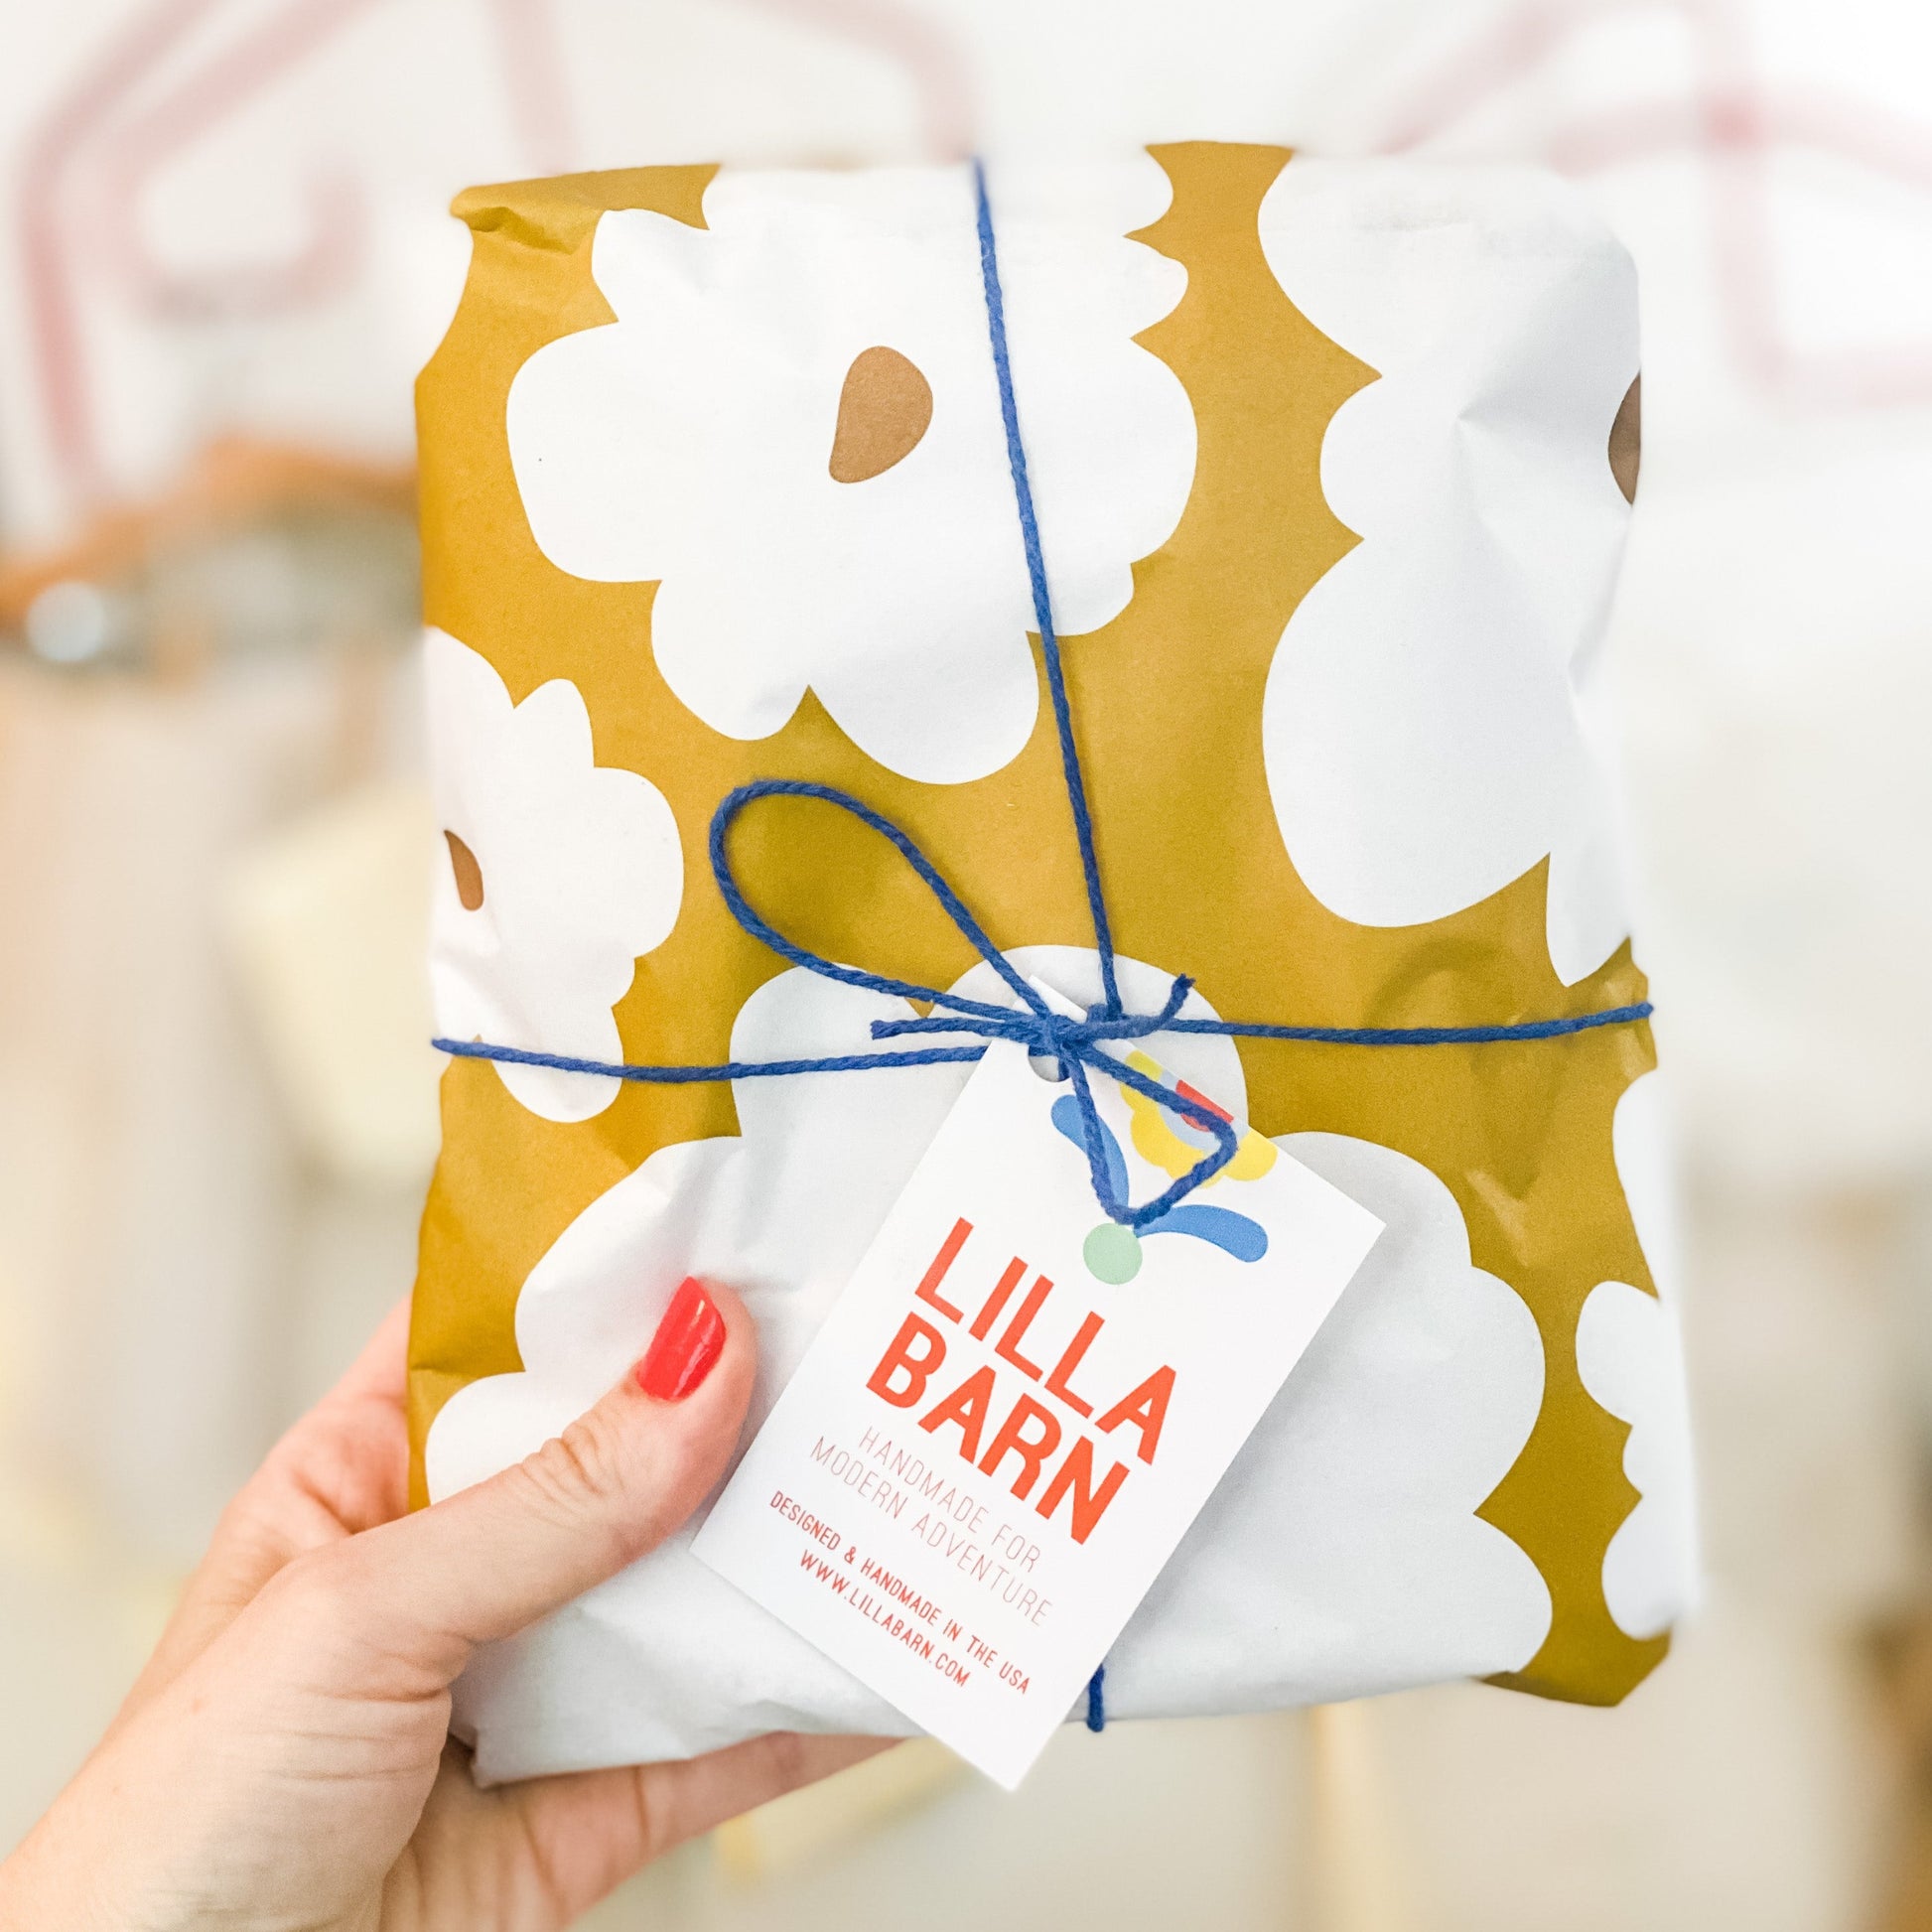 Lilla Barn package wrapped in paper designed by Chicago designer Form and Funk